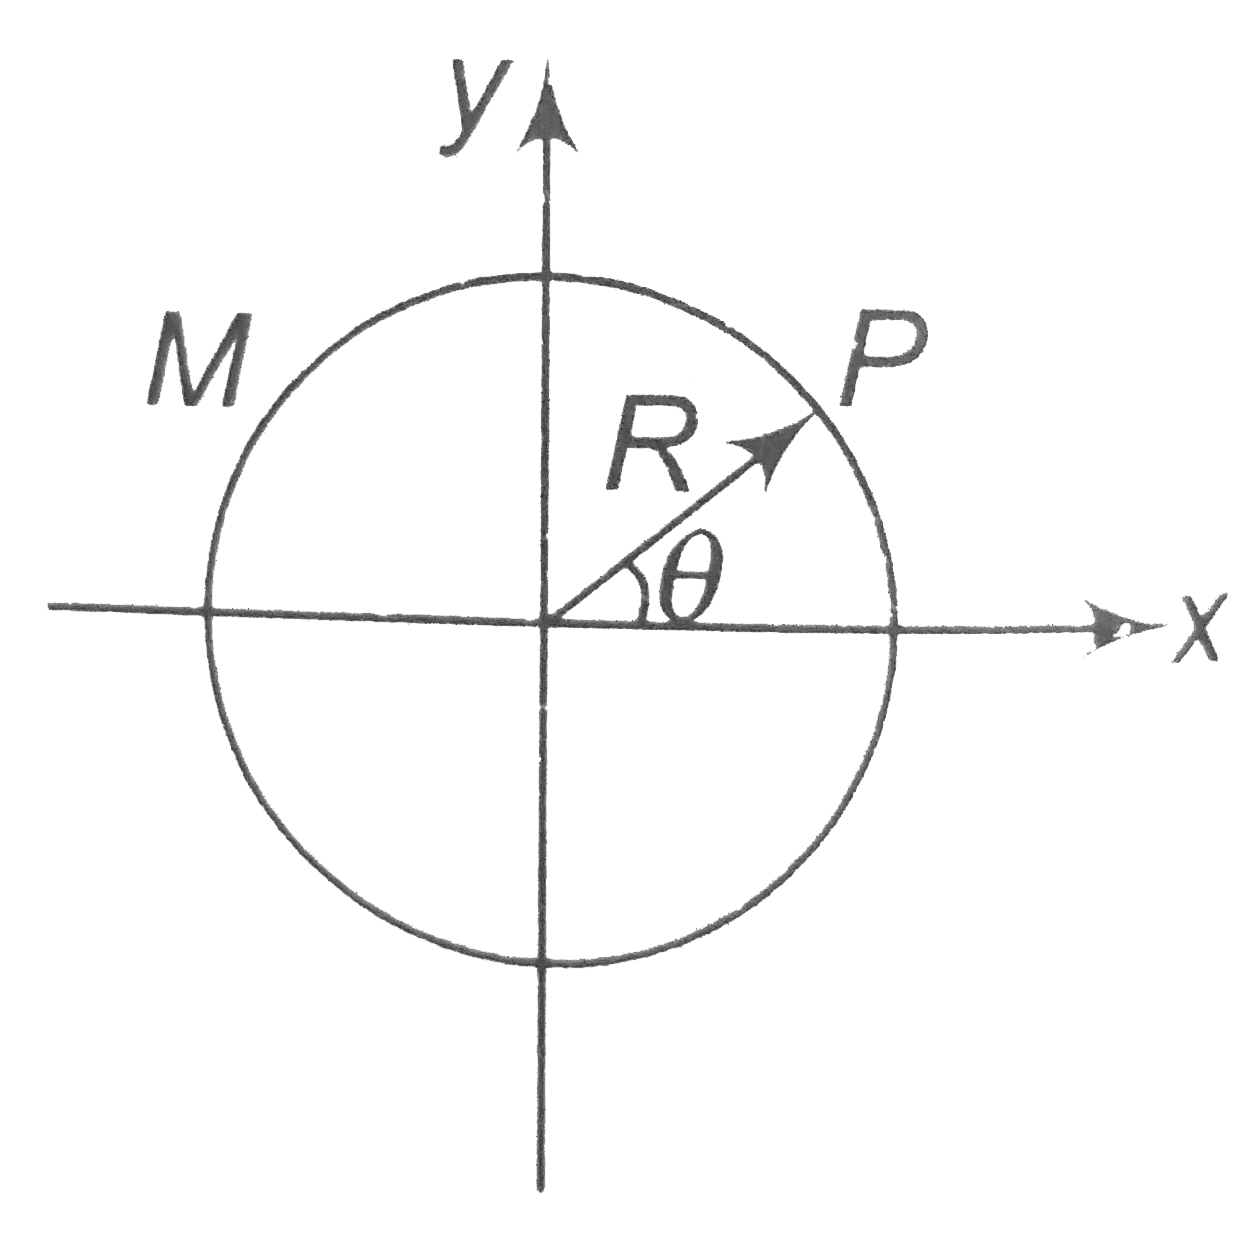 A ring of mass M and radius R lies in x-y plane with its centre at origin as shown. The mass distribution of ring is non uniform such that, at any point P on the ring, the mass per unit length is given by lamda = lamda0 cos^2 theta (where lamda0 is a positive constant). Then the moment of inertia of the ring about z-axis is :   .